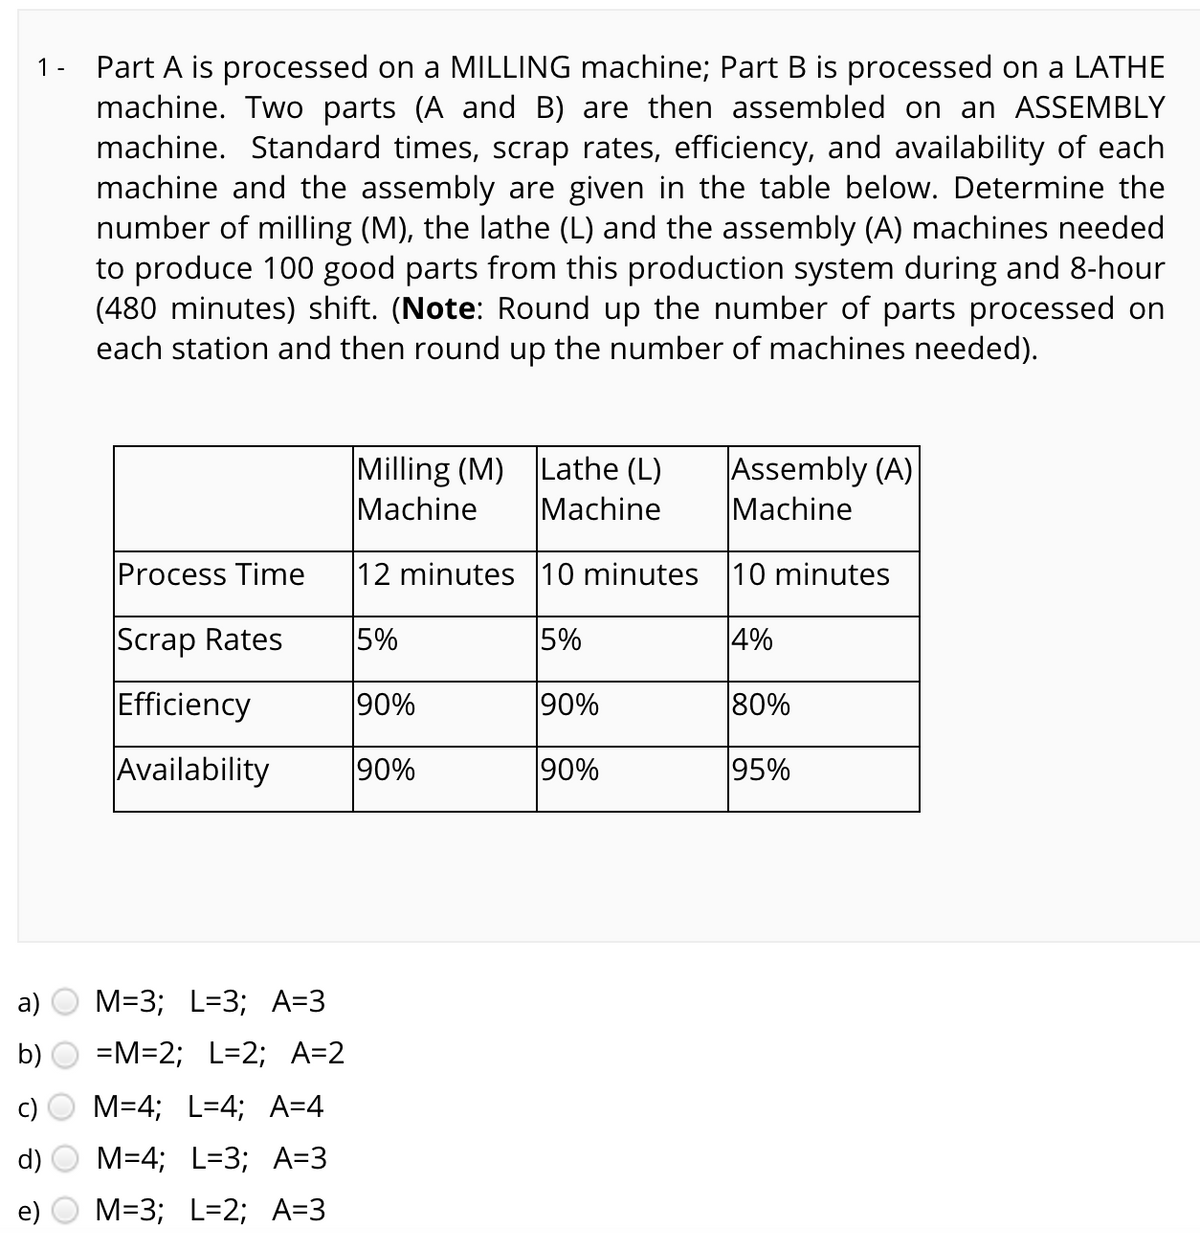 Part A is processed on a MILLING machine; Part B is processed on a LATHE
machine. Two parts (A and B) are then assembled on an ASSEMBLY
machine. Standard times, scrap rates, efficiency, and availability of each
machine and the assembly are given in the table below. Determine the
number of milling (M), the lathe (L) and the assembly (A) machines needed
to produce 100 good parts from this production system during and 8-hour
(480 minutes) shift. (Note: Round up the number of parts processed on
each station and then round up the number of machines needed).
1 -
Milling (M) Lathe (L)
Machine
|Мachine
Assembly (A)
Machine
Process Time
12 minutes 10 minutes 10 minutes
Scrap Rates
5%
5%
4%
Efficiency
90%
90%
80%
Availability
90%
90%
95%
a)
М-3; L33; А-3
b)
=M=2; L=2; A=2
М-4; L34; А-4
d)
M=4; L=3; A=3
M=3; L=2; A=3
